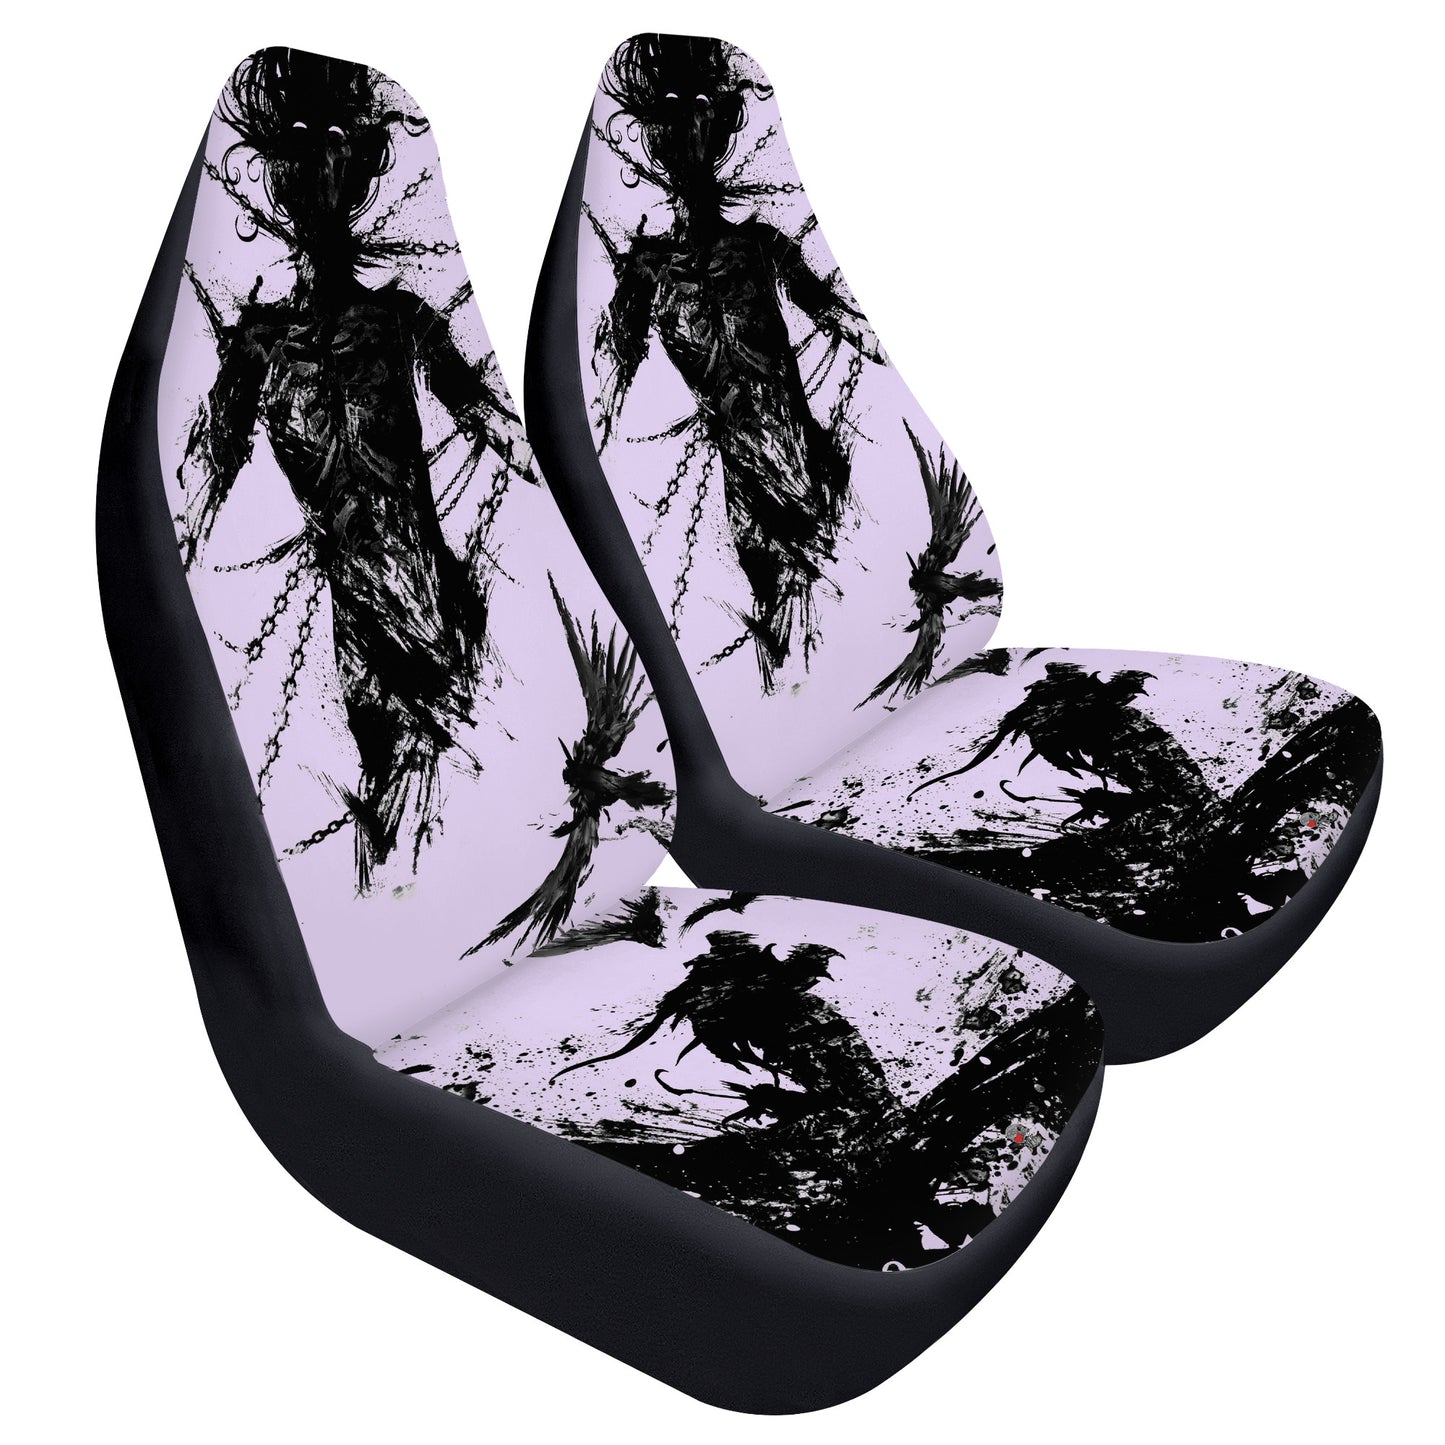 Fearless Car Seat Covers